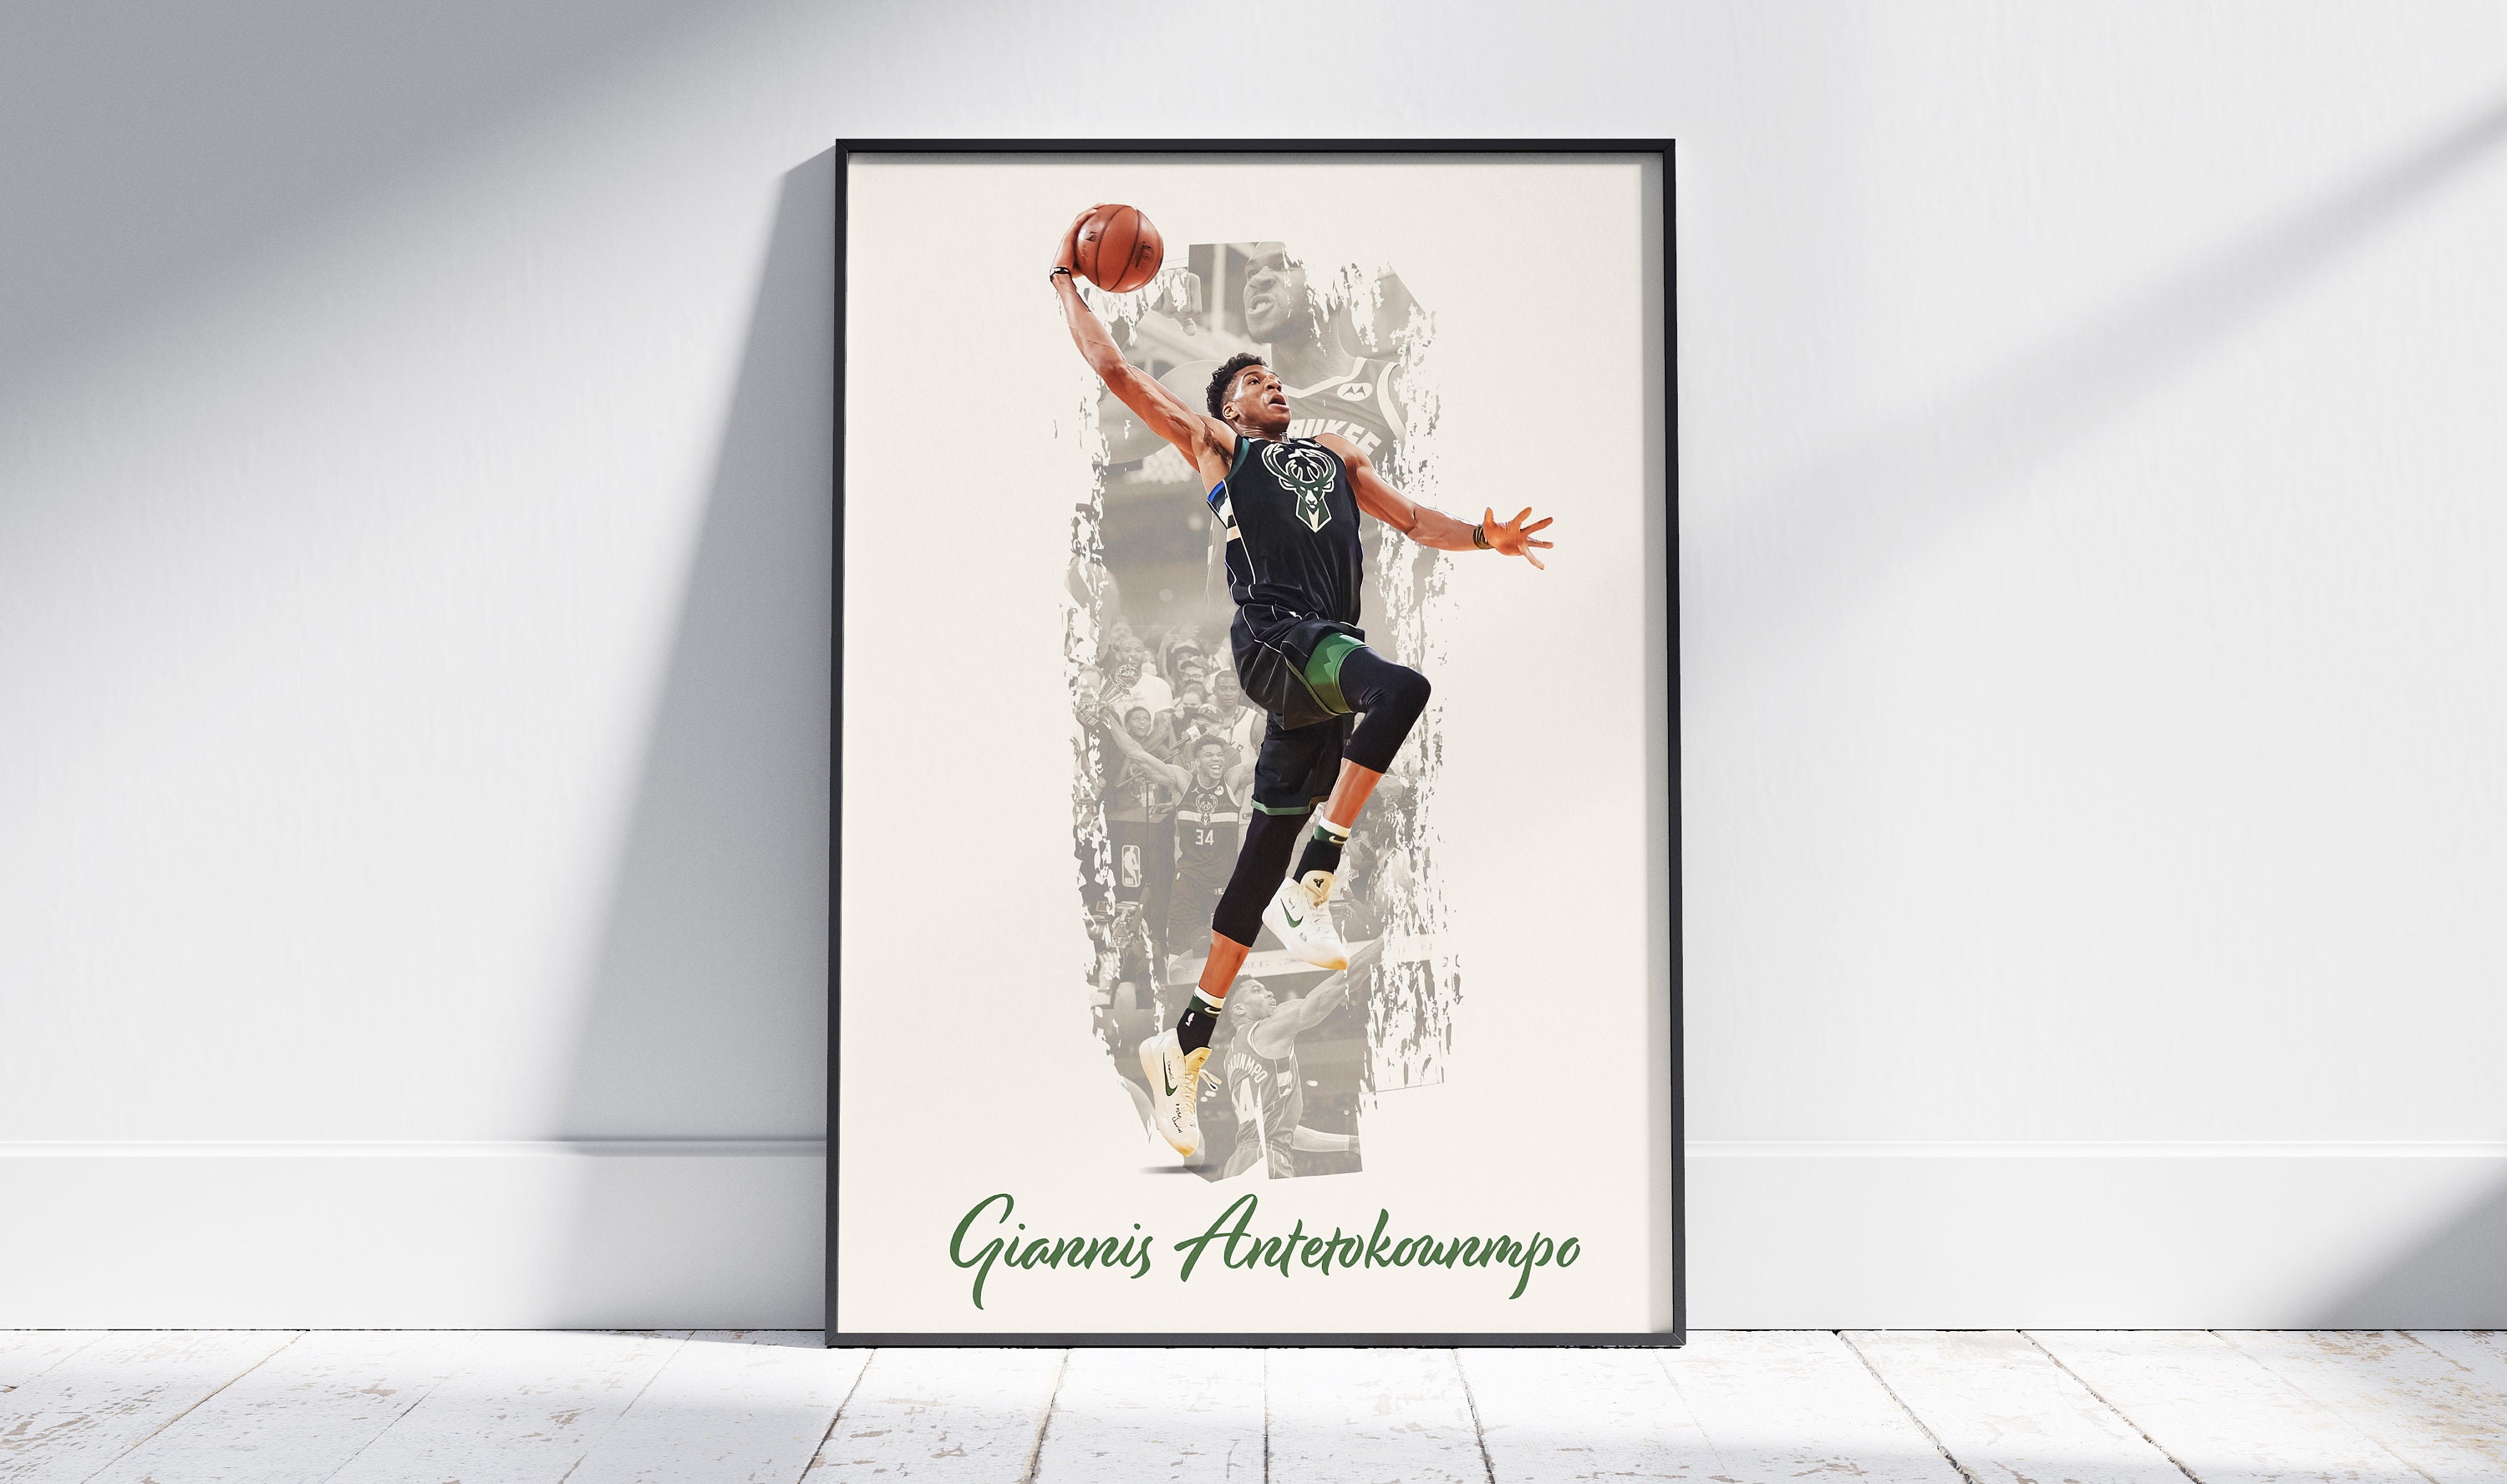 Retro Giannis Wall Mural  Buy online at Europosters